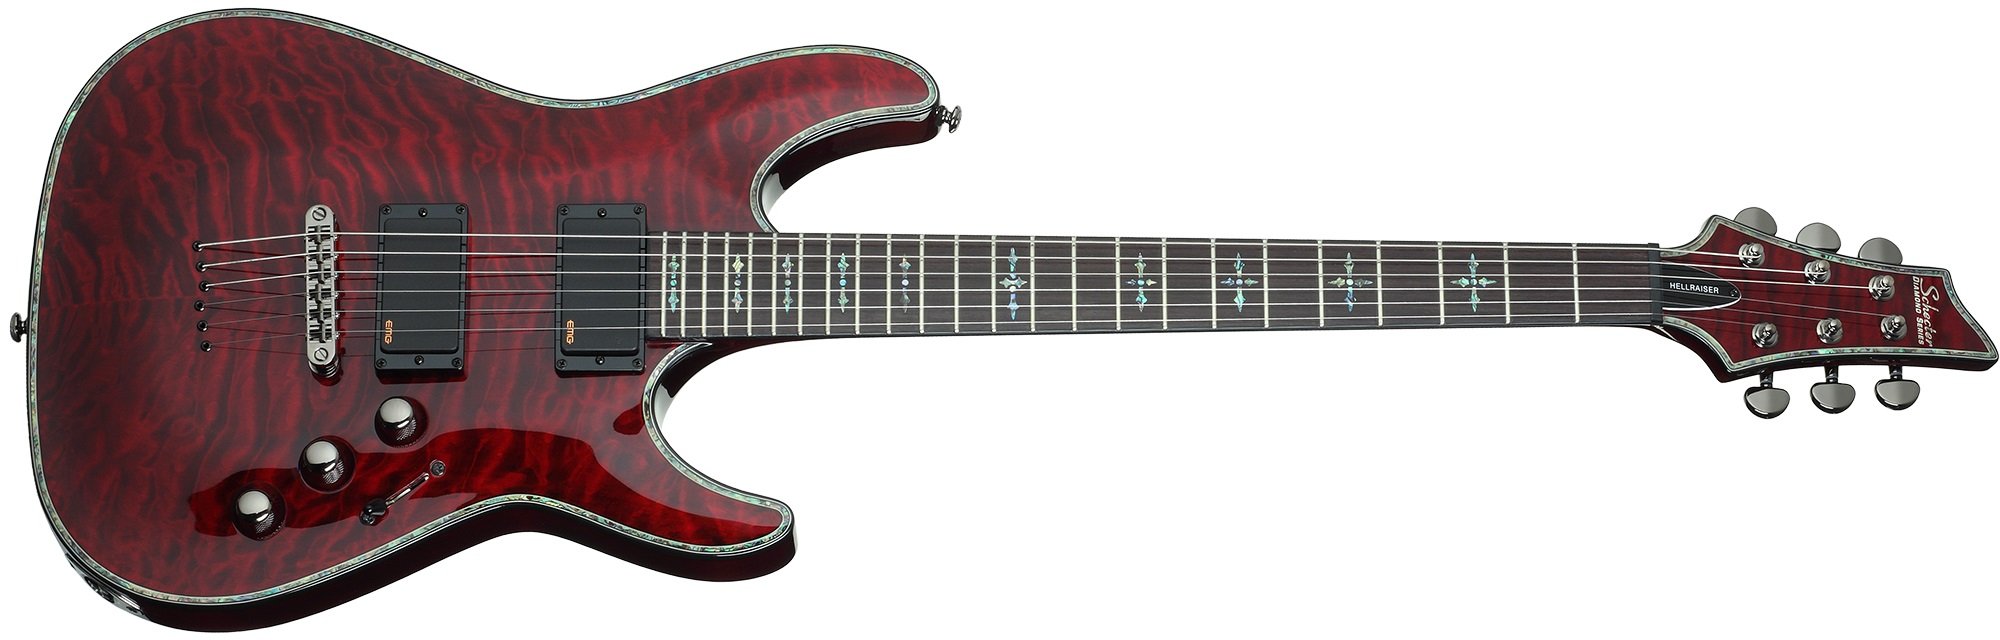 Schecter Hellraiser C-1 Electric Guitar with Sting Thru Body and EMG Pickups - BLACK CHERRY 1788 for sale